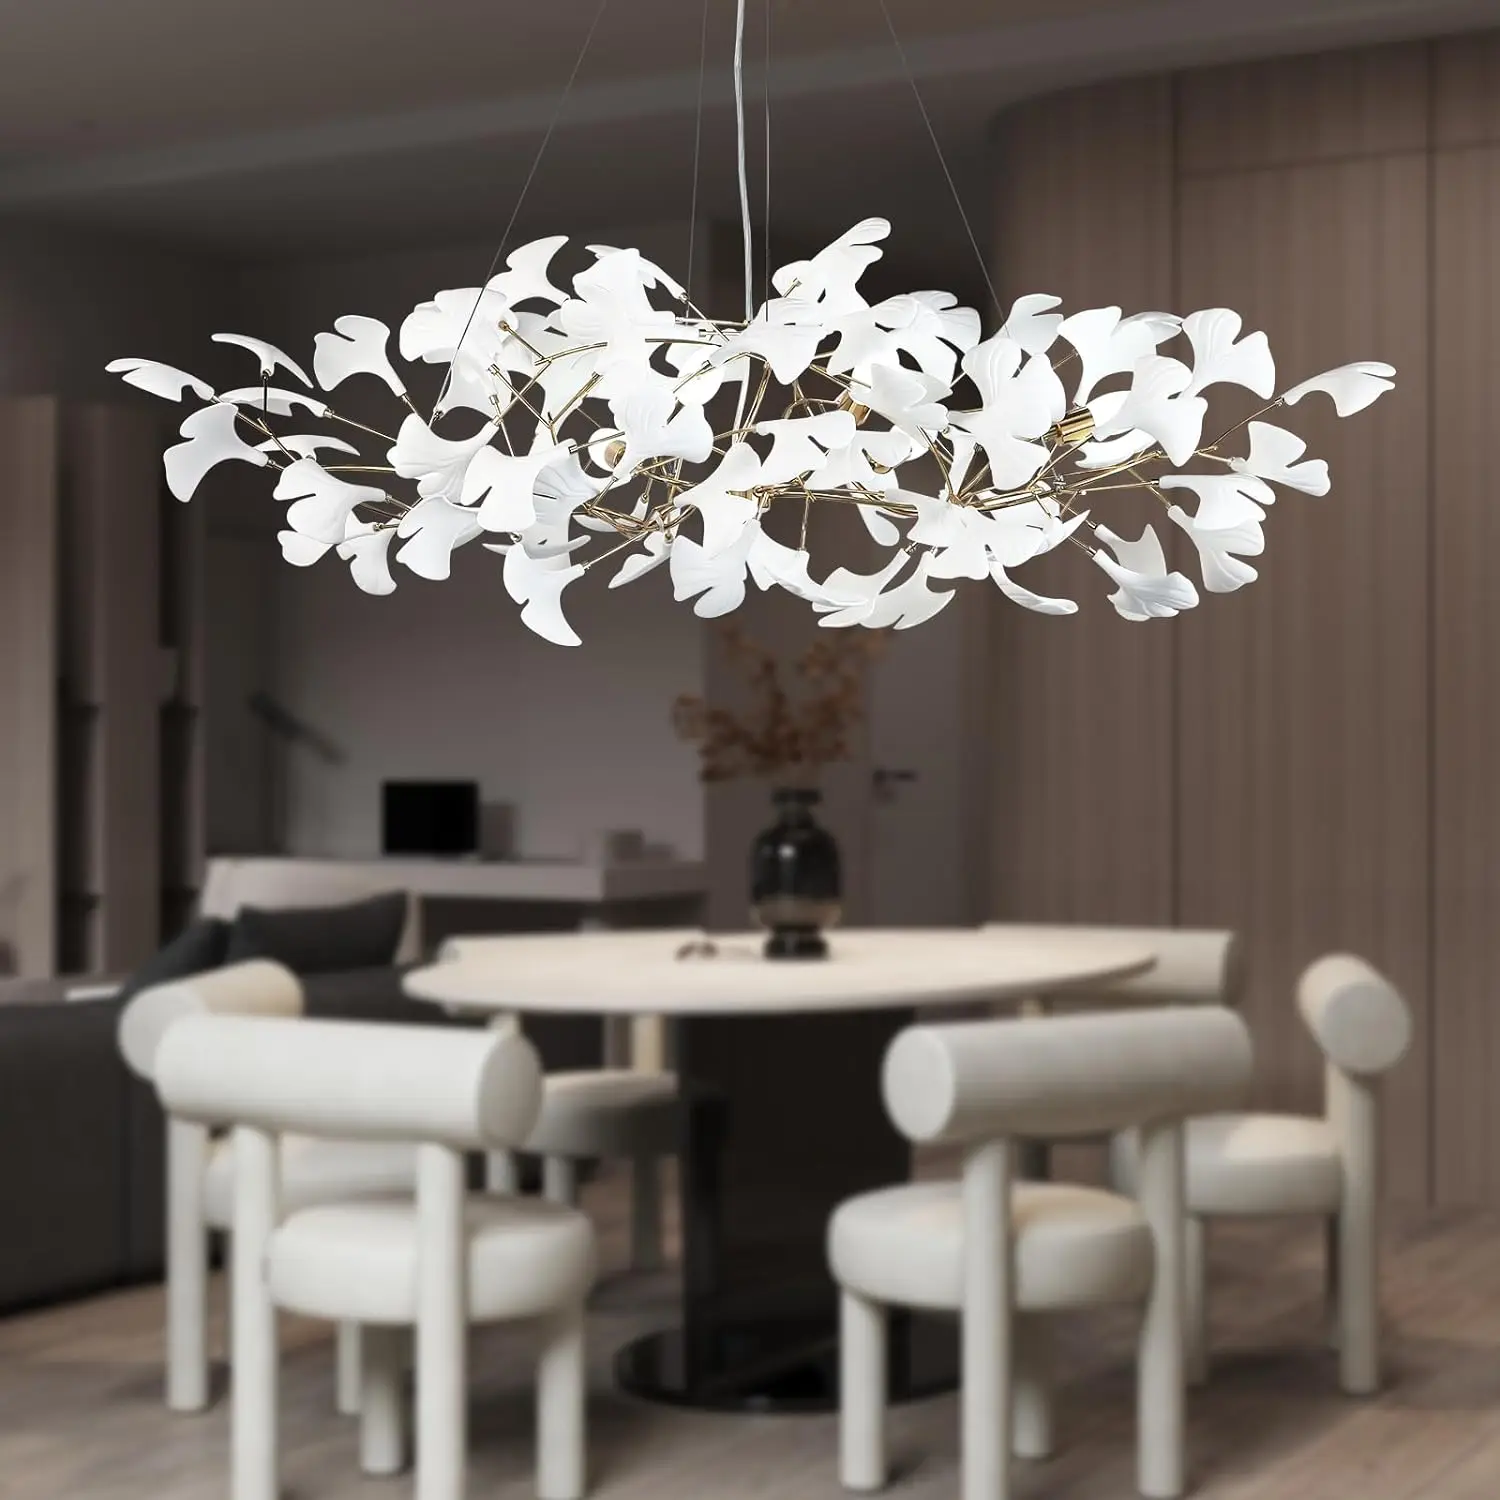 

Chandeliers for Dining Room - 47 Inch Tree Branch Art Deco Chandelier, White Rectangular Brass Chandeliers with Ginkgo Leaves